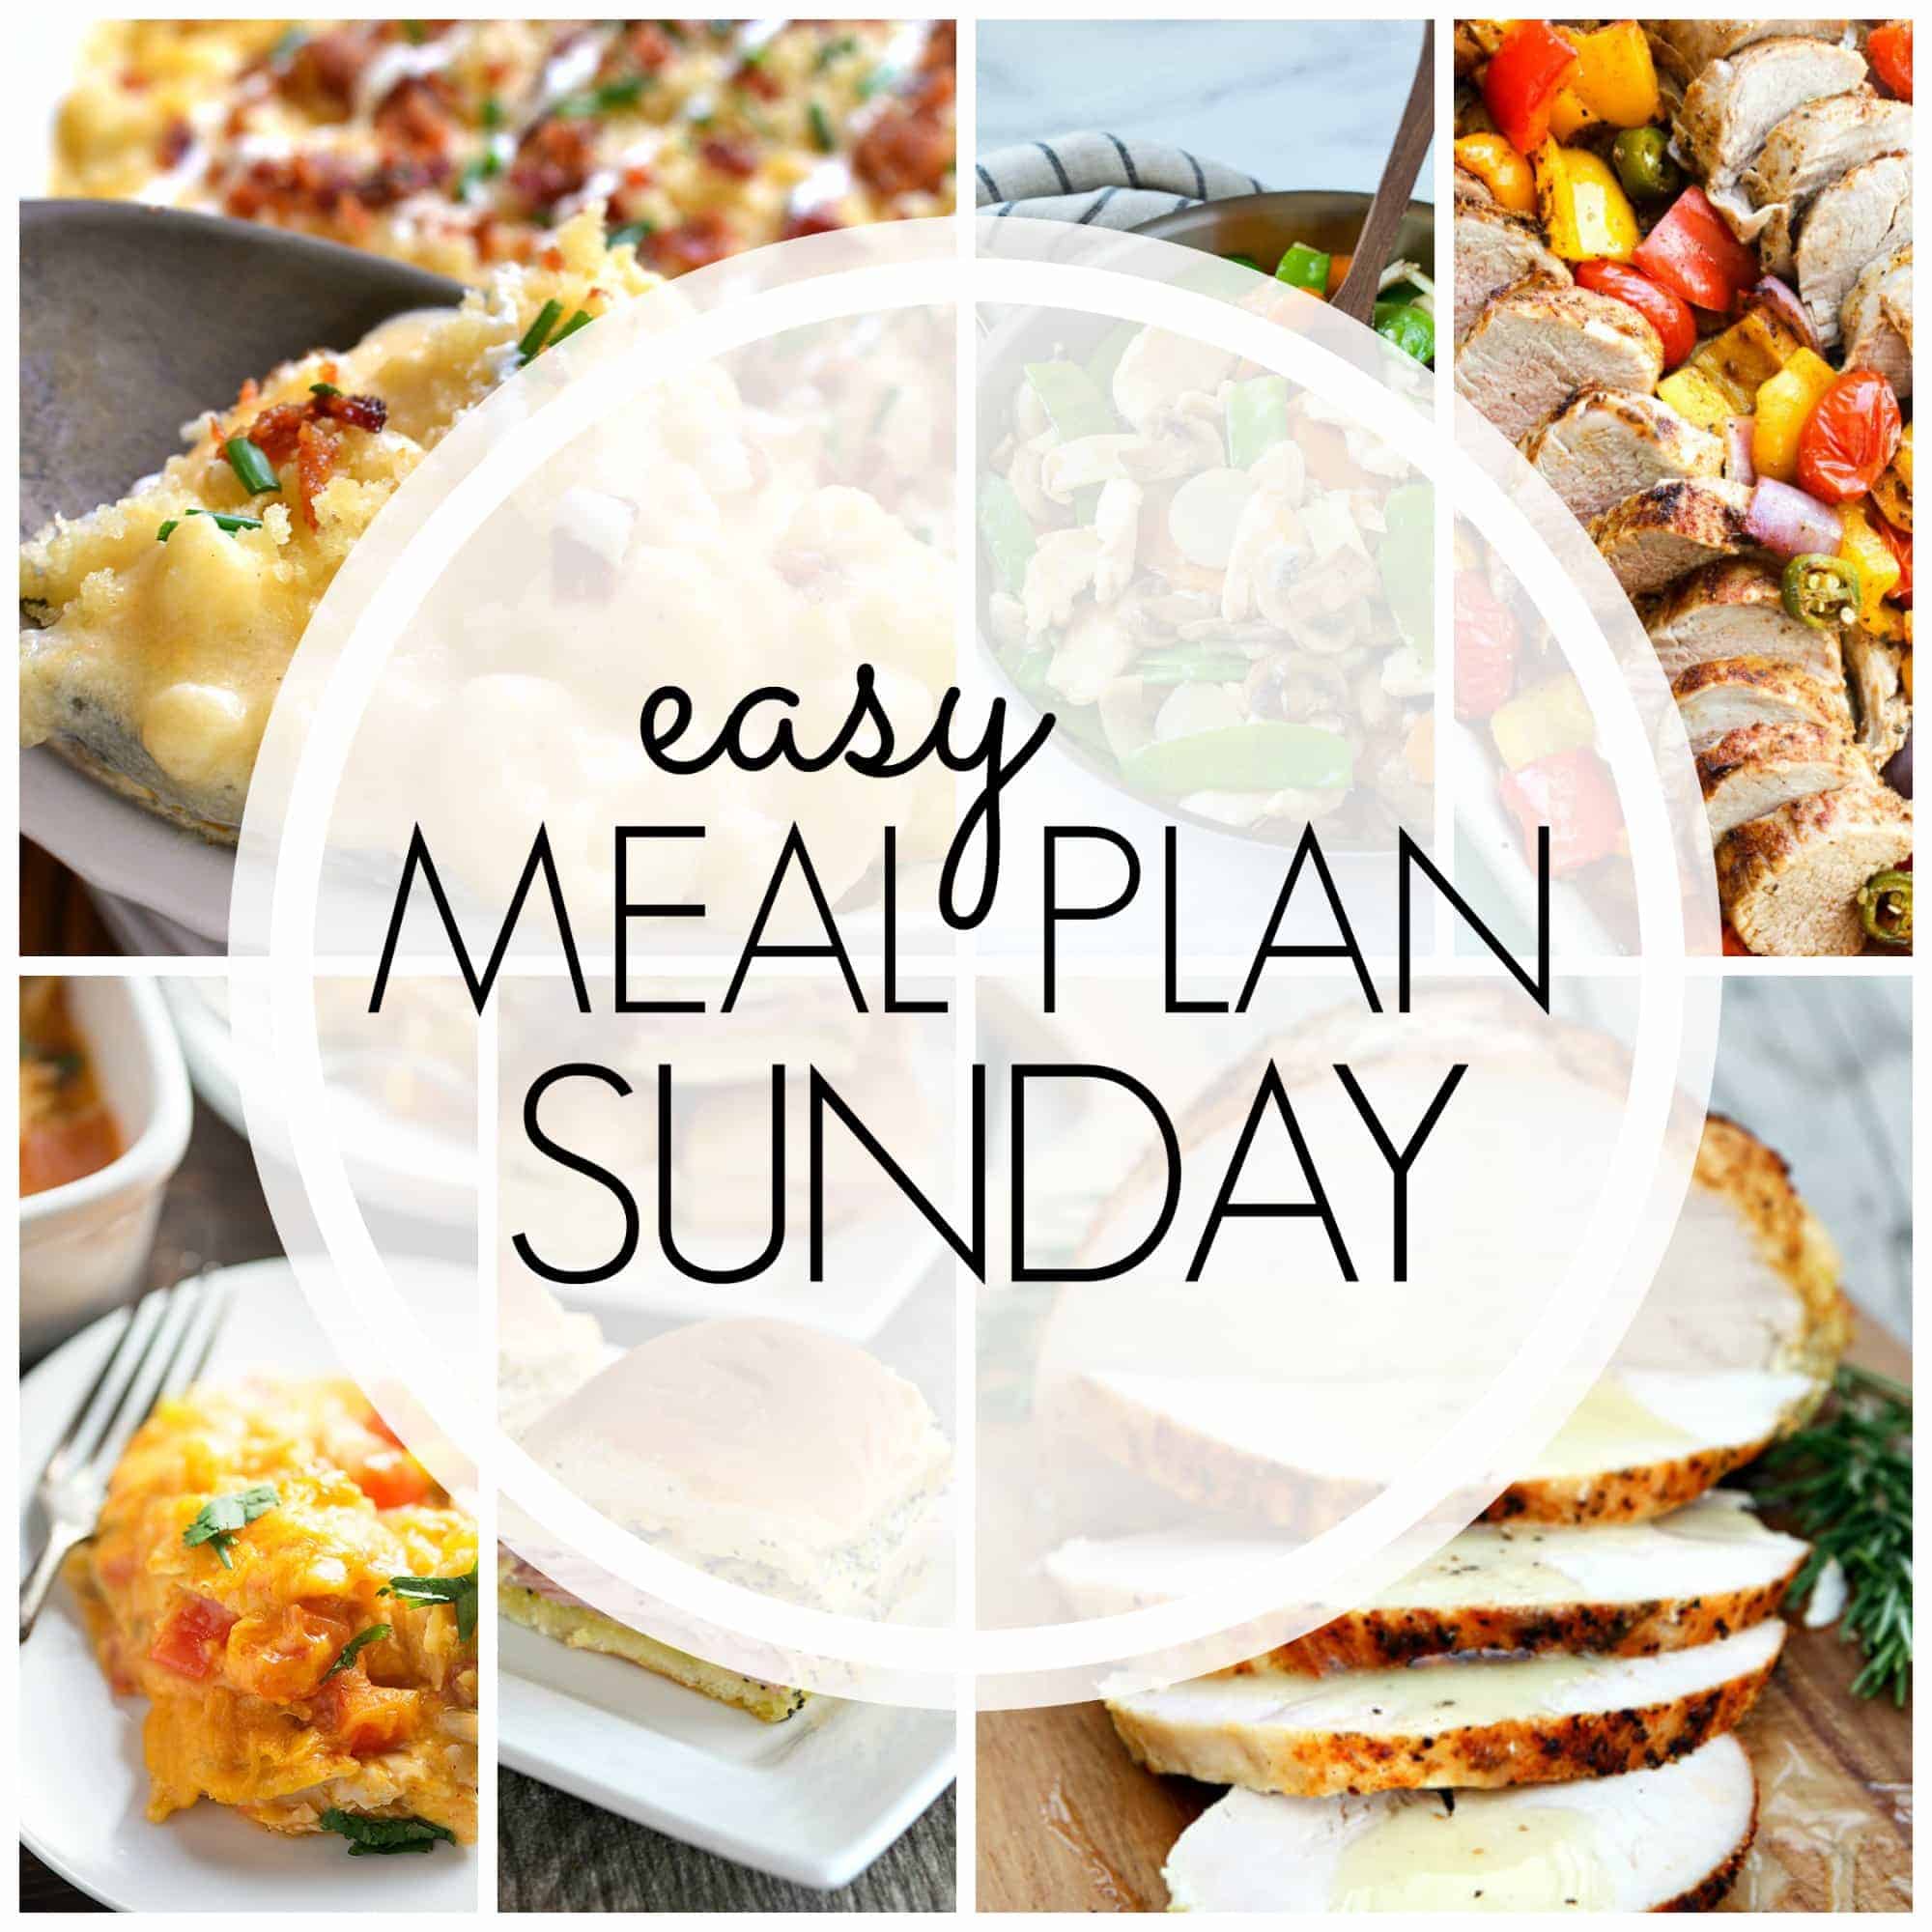 With Easy Meal Plan Sunday Week 74 - six dinners, two desserts and a breakfast recipe will help you remove the guesswork from this week's meal planning.